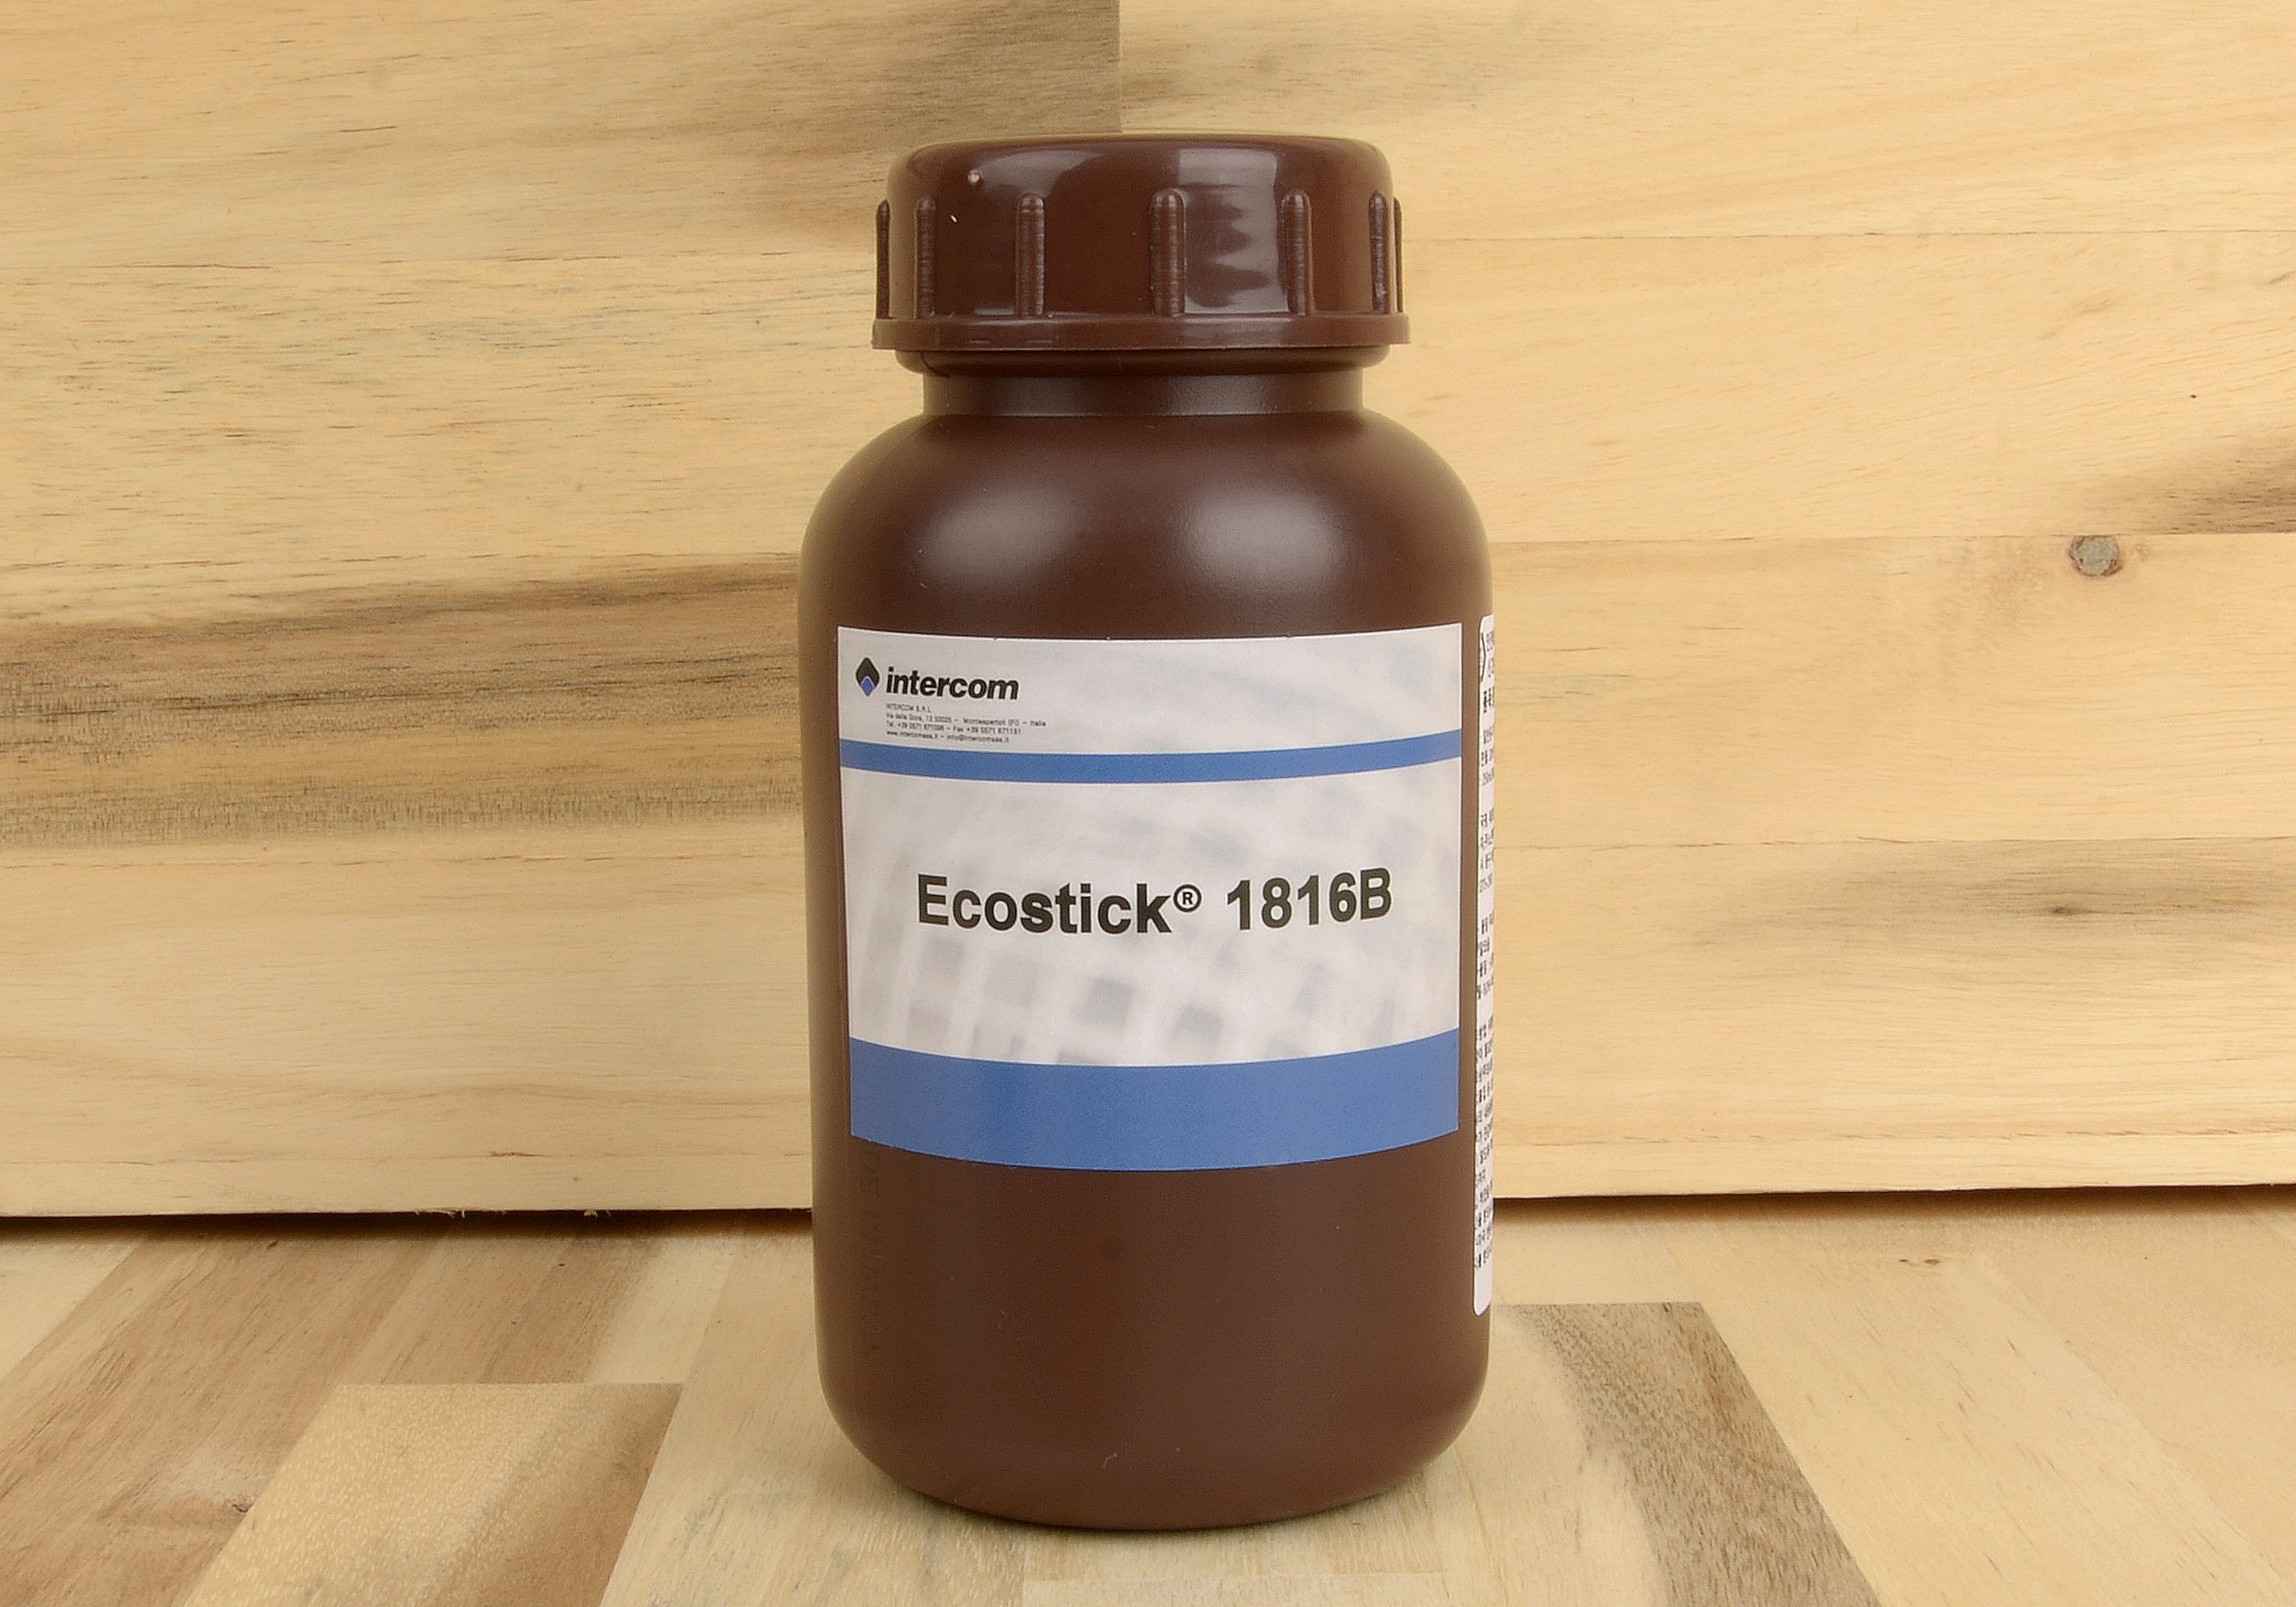 Intercom Ecostick ® 1816B 8oz Water based adhesive for leather and fabric